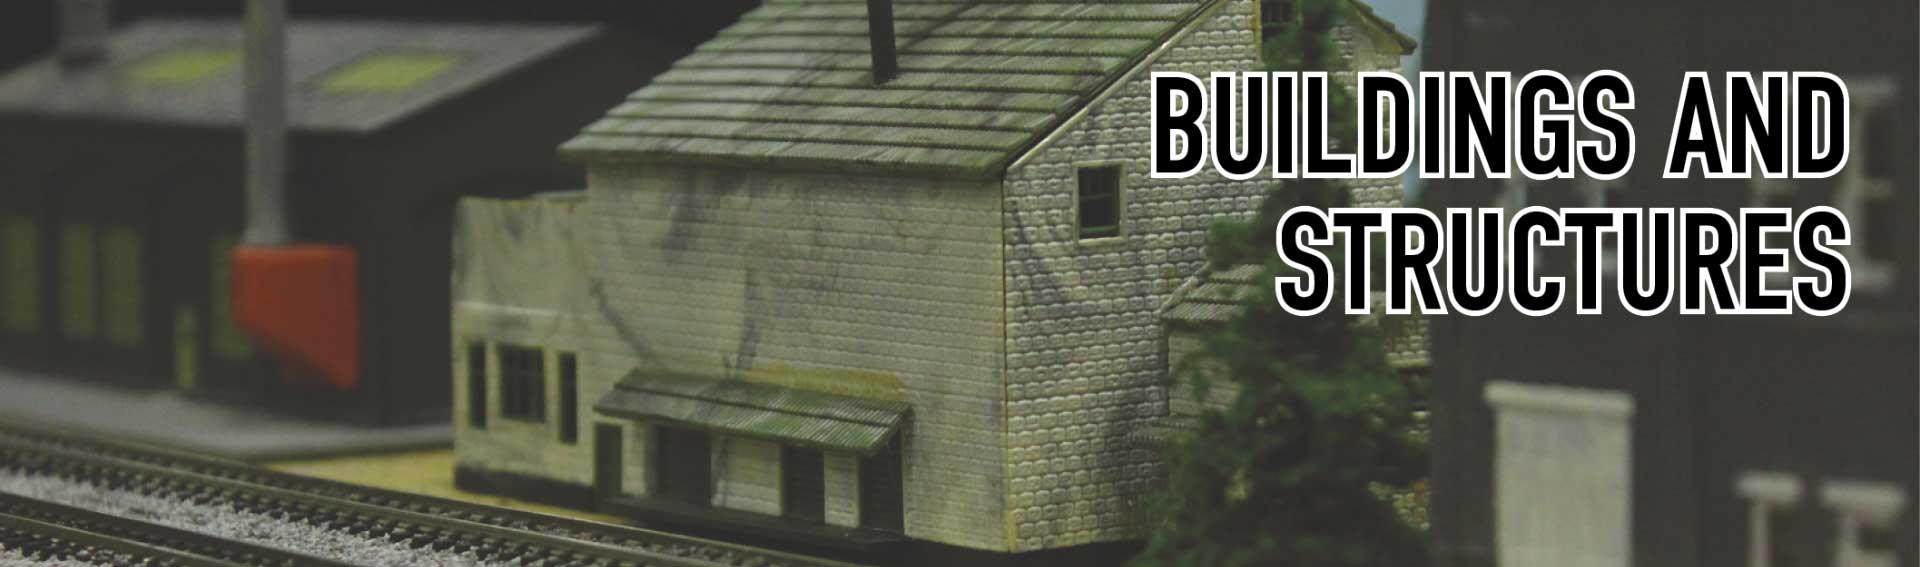 Shop all model railroad buildings and structures to bring life to your layout